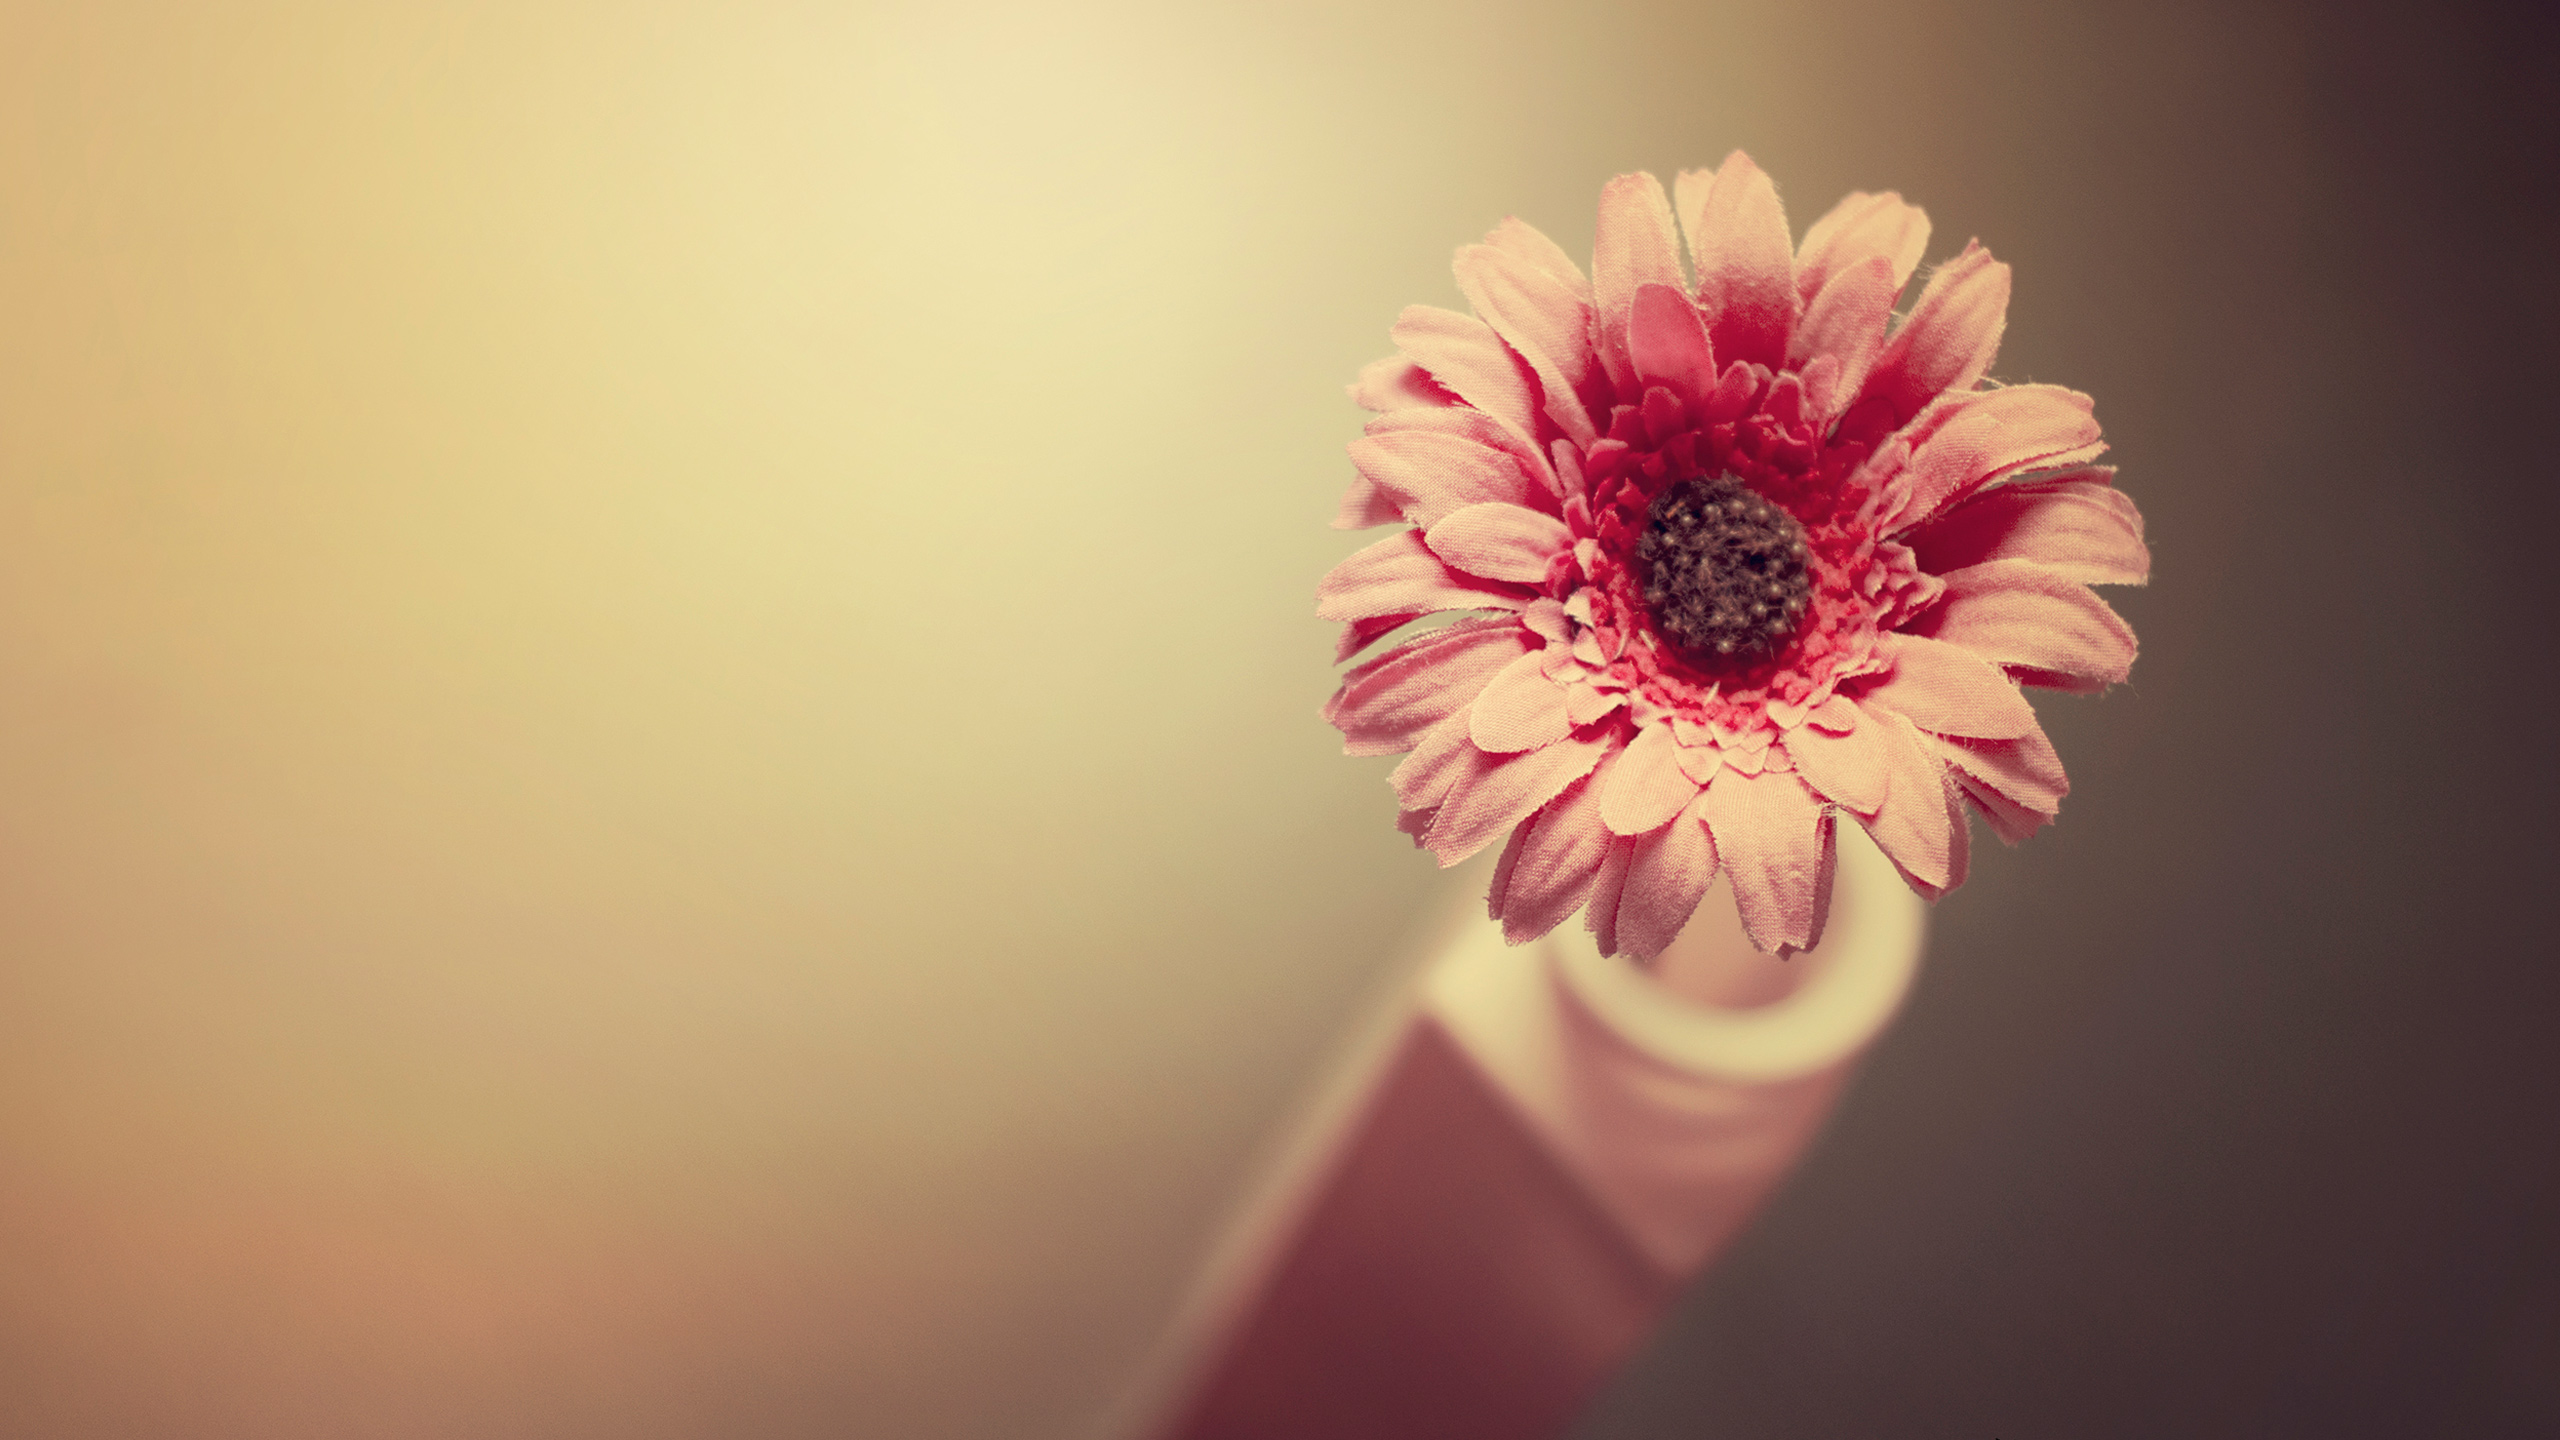 Simple Flower wallpaper by rajukhann  Download on ZEDGE  17cc